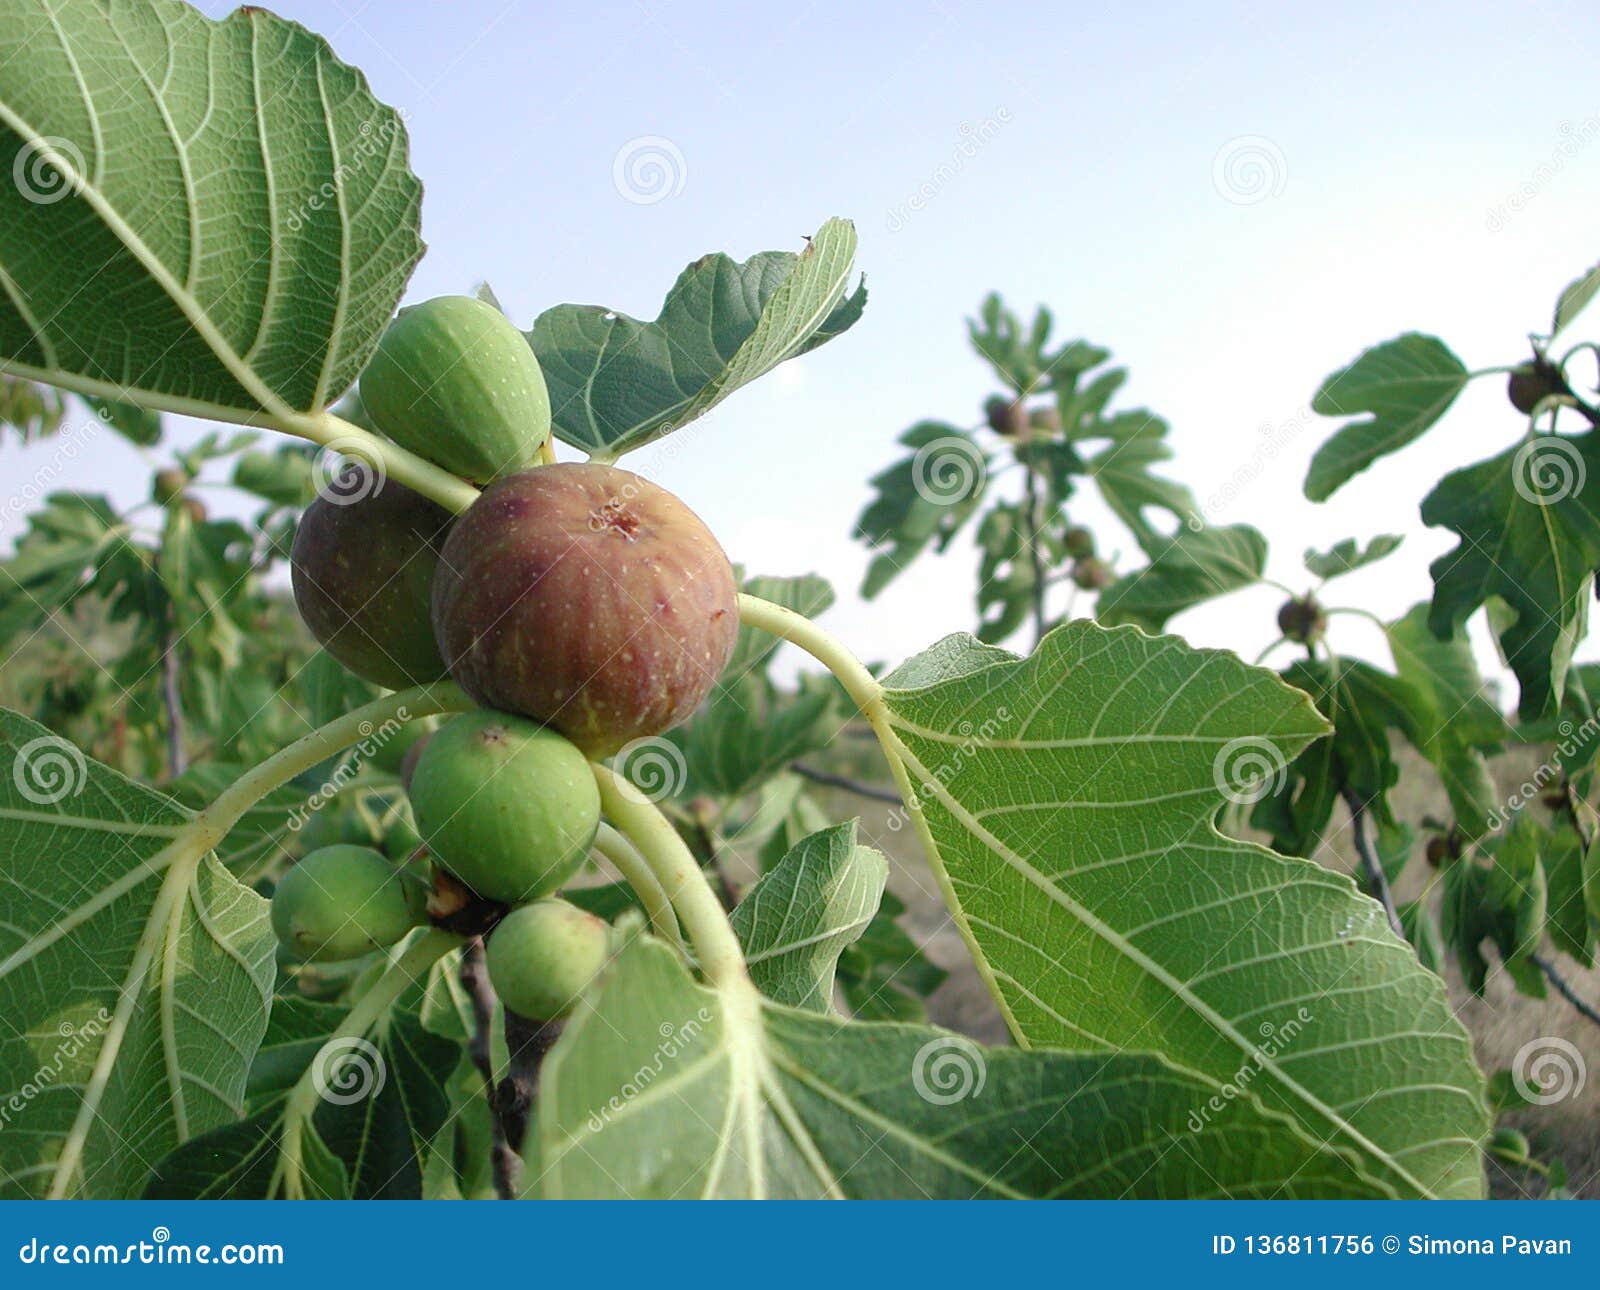 ficus carica branch with figs